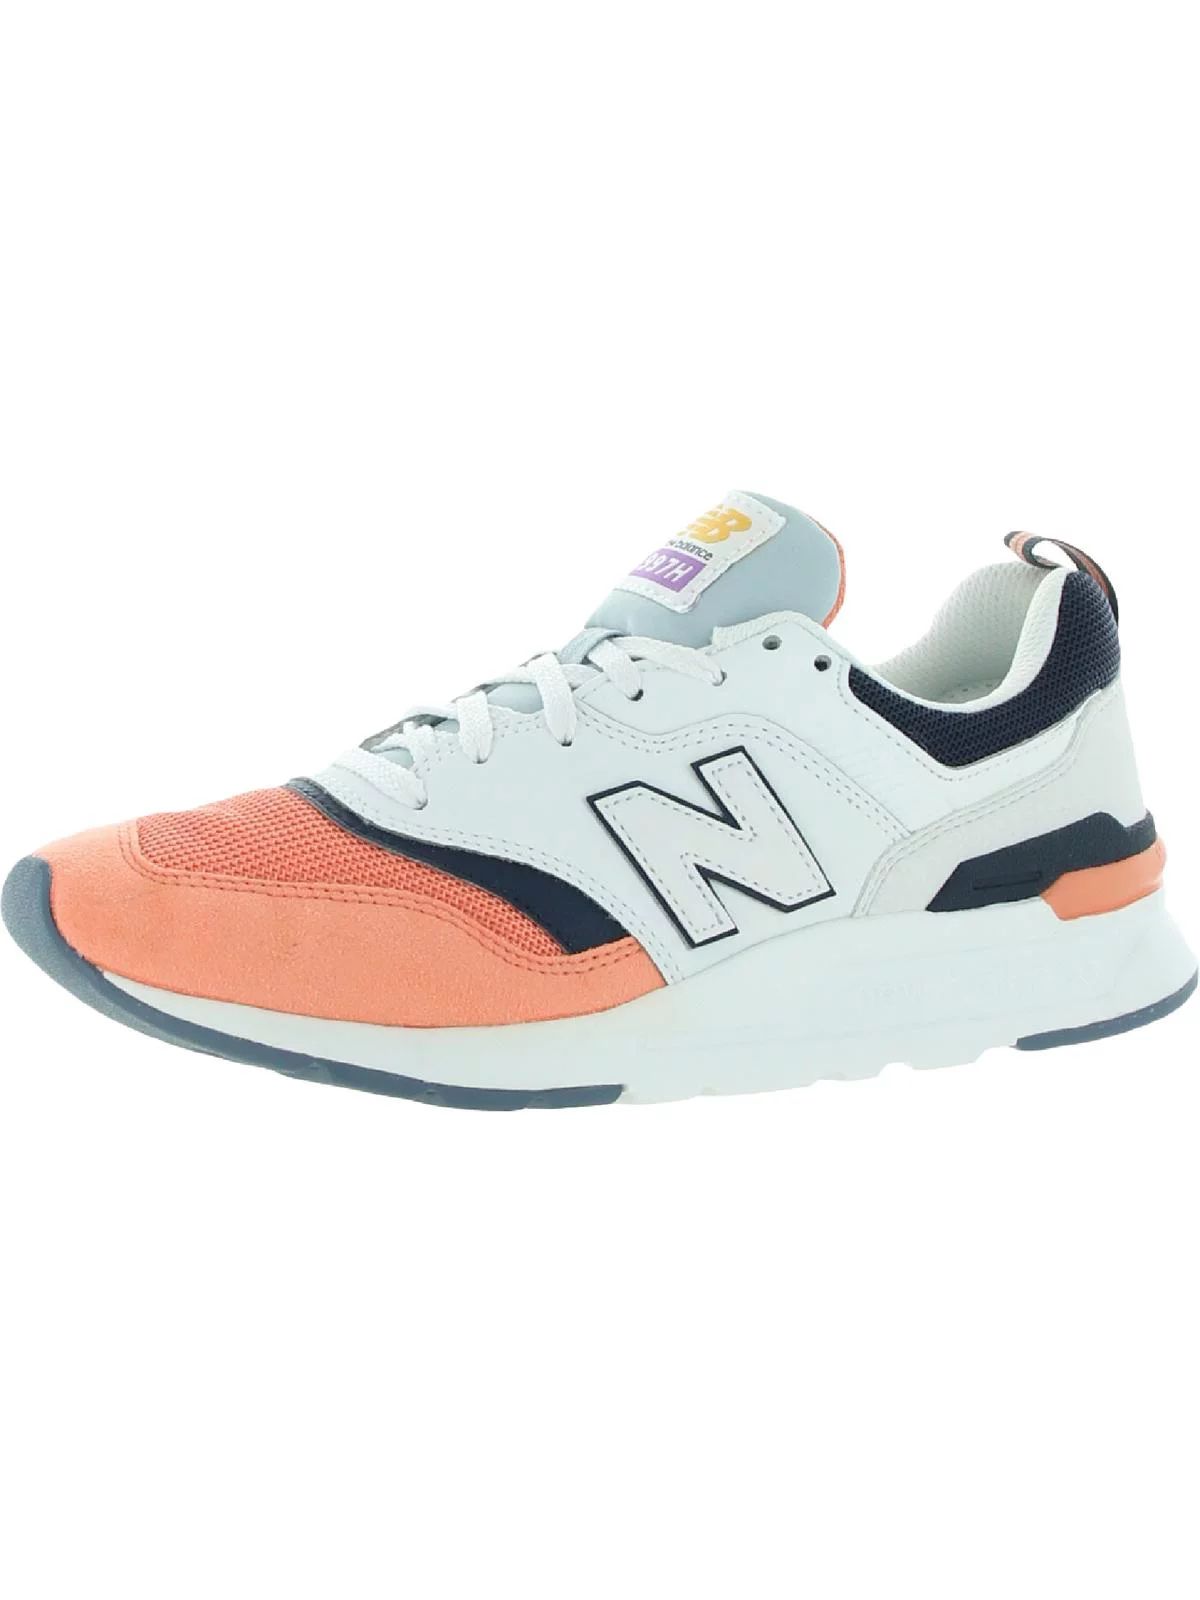 New Balance 997 Women's Mixed Media Lace-Up Lifestyle Sneakers | Walmart (US)